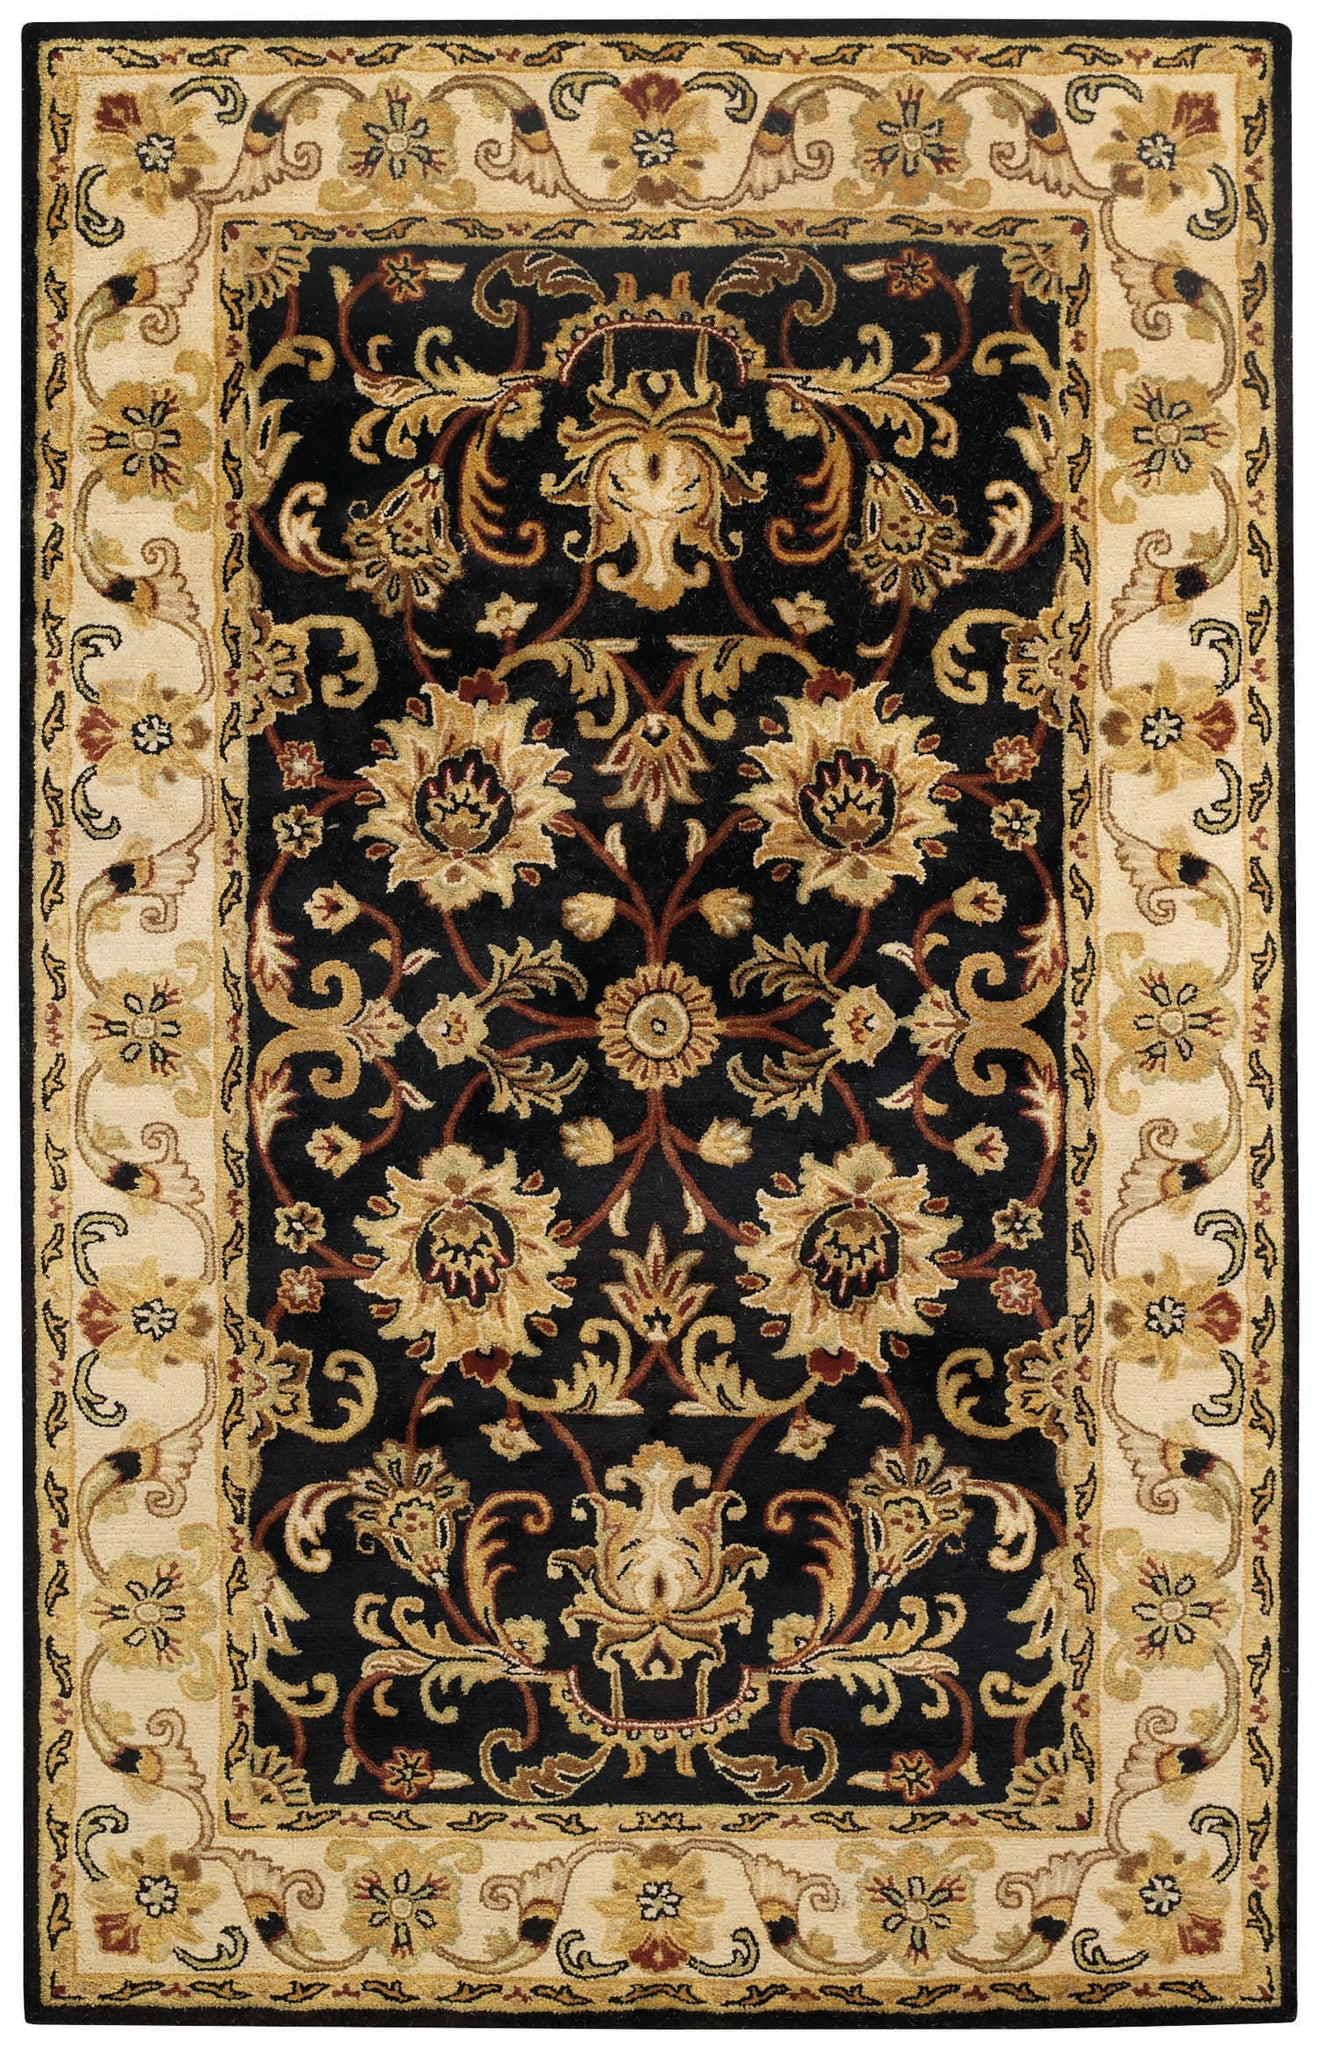 Capel Guilded 9205 Onyx 360 Area Rug main image